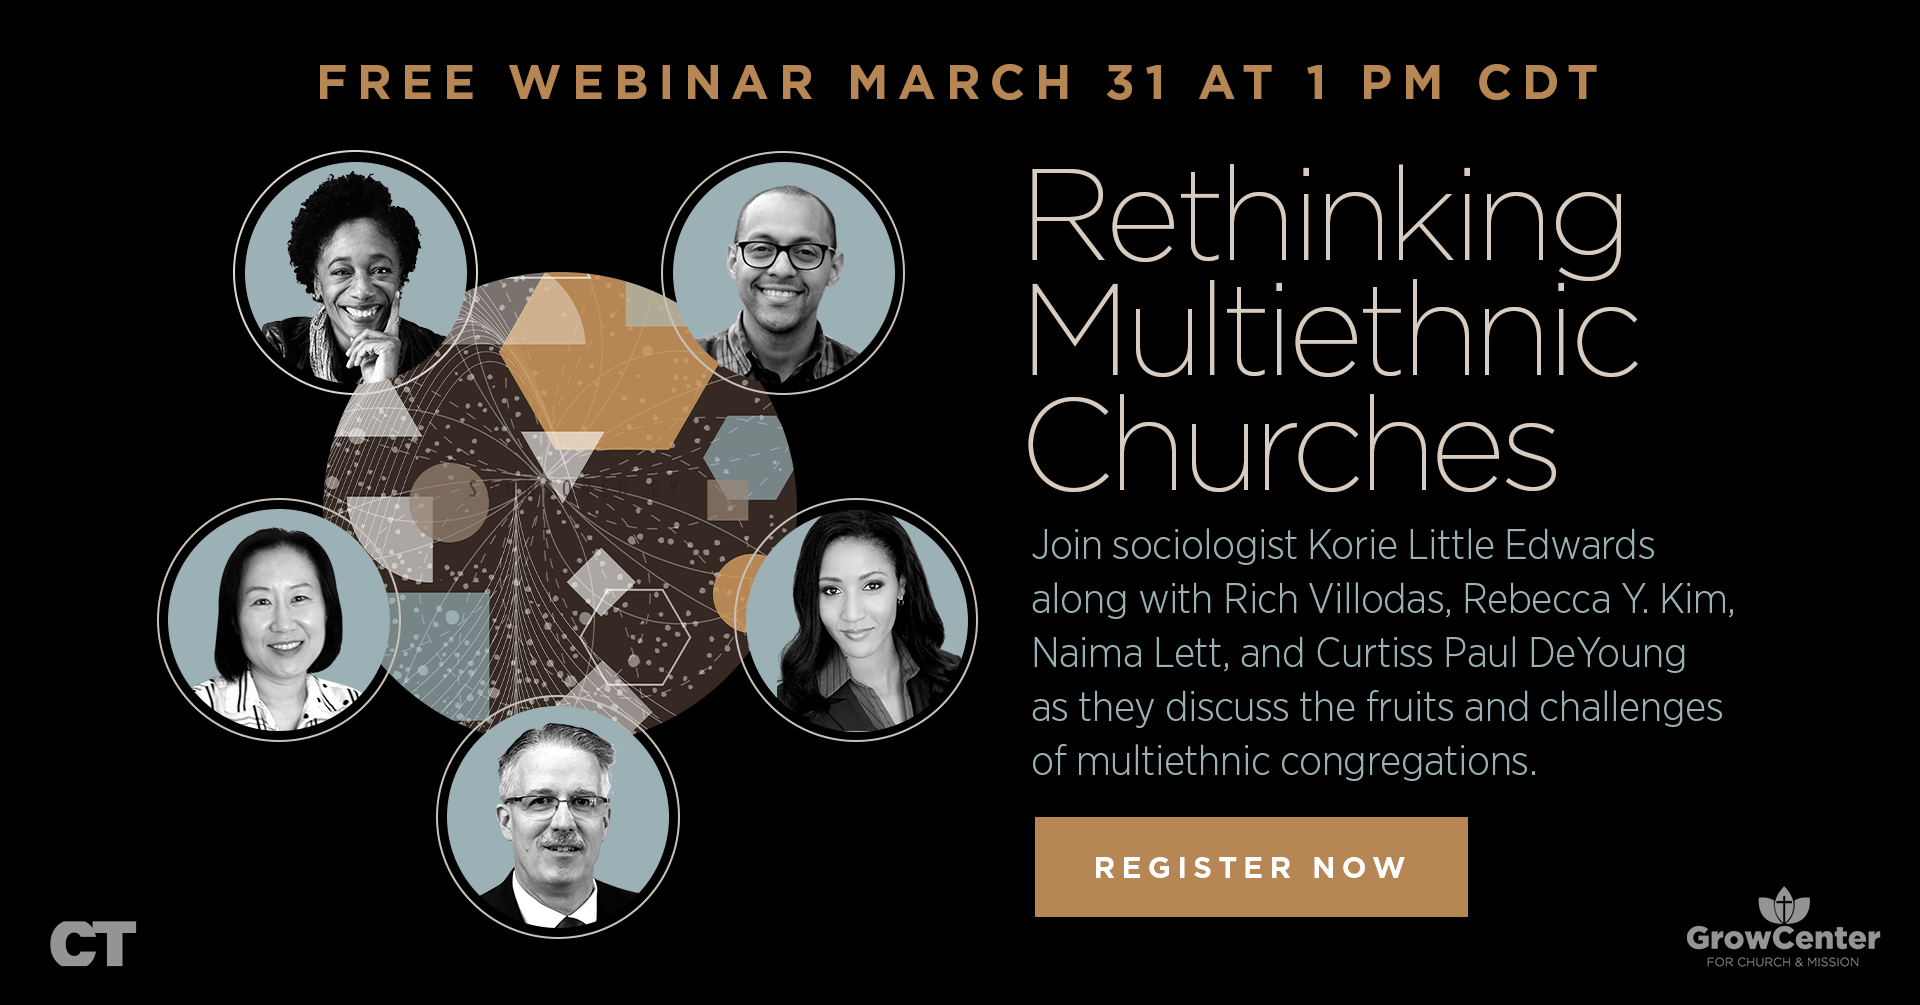 Banner reads "Rethinking Multiethnic Churches Free Webinar March 31 1pm CDT" with headshots of five speakers including MCC CEO Rev. Dr. Curtiss Paul Deyoung